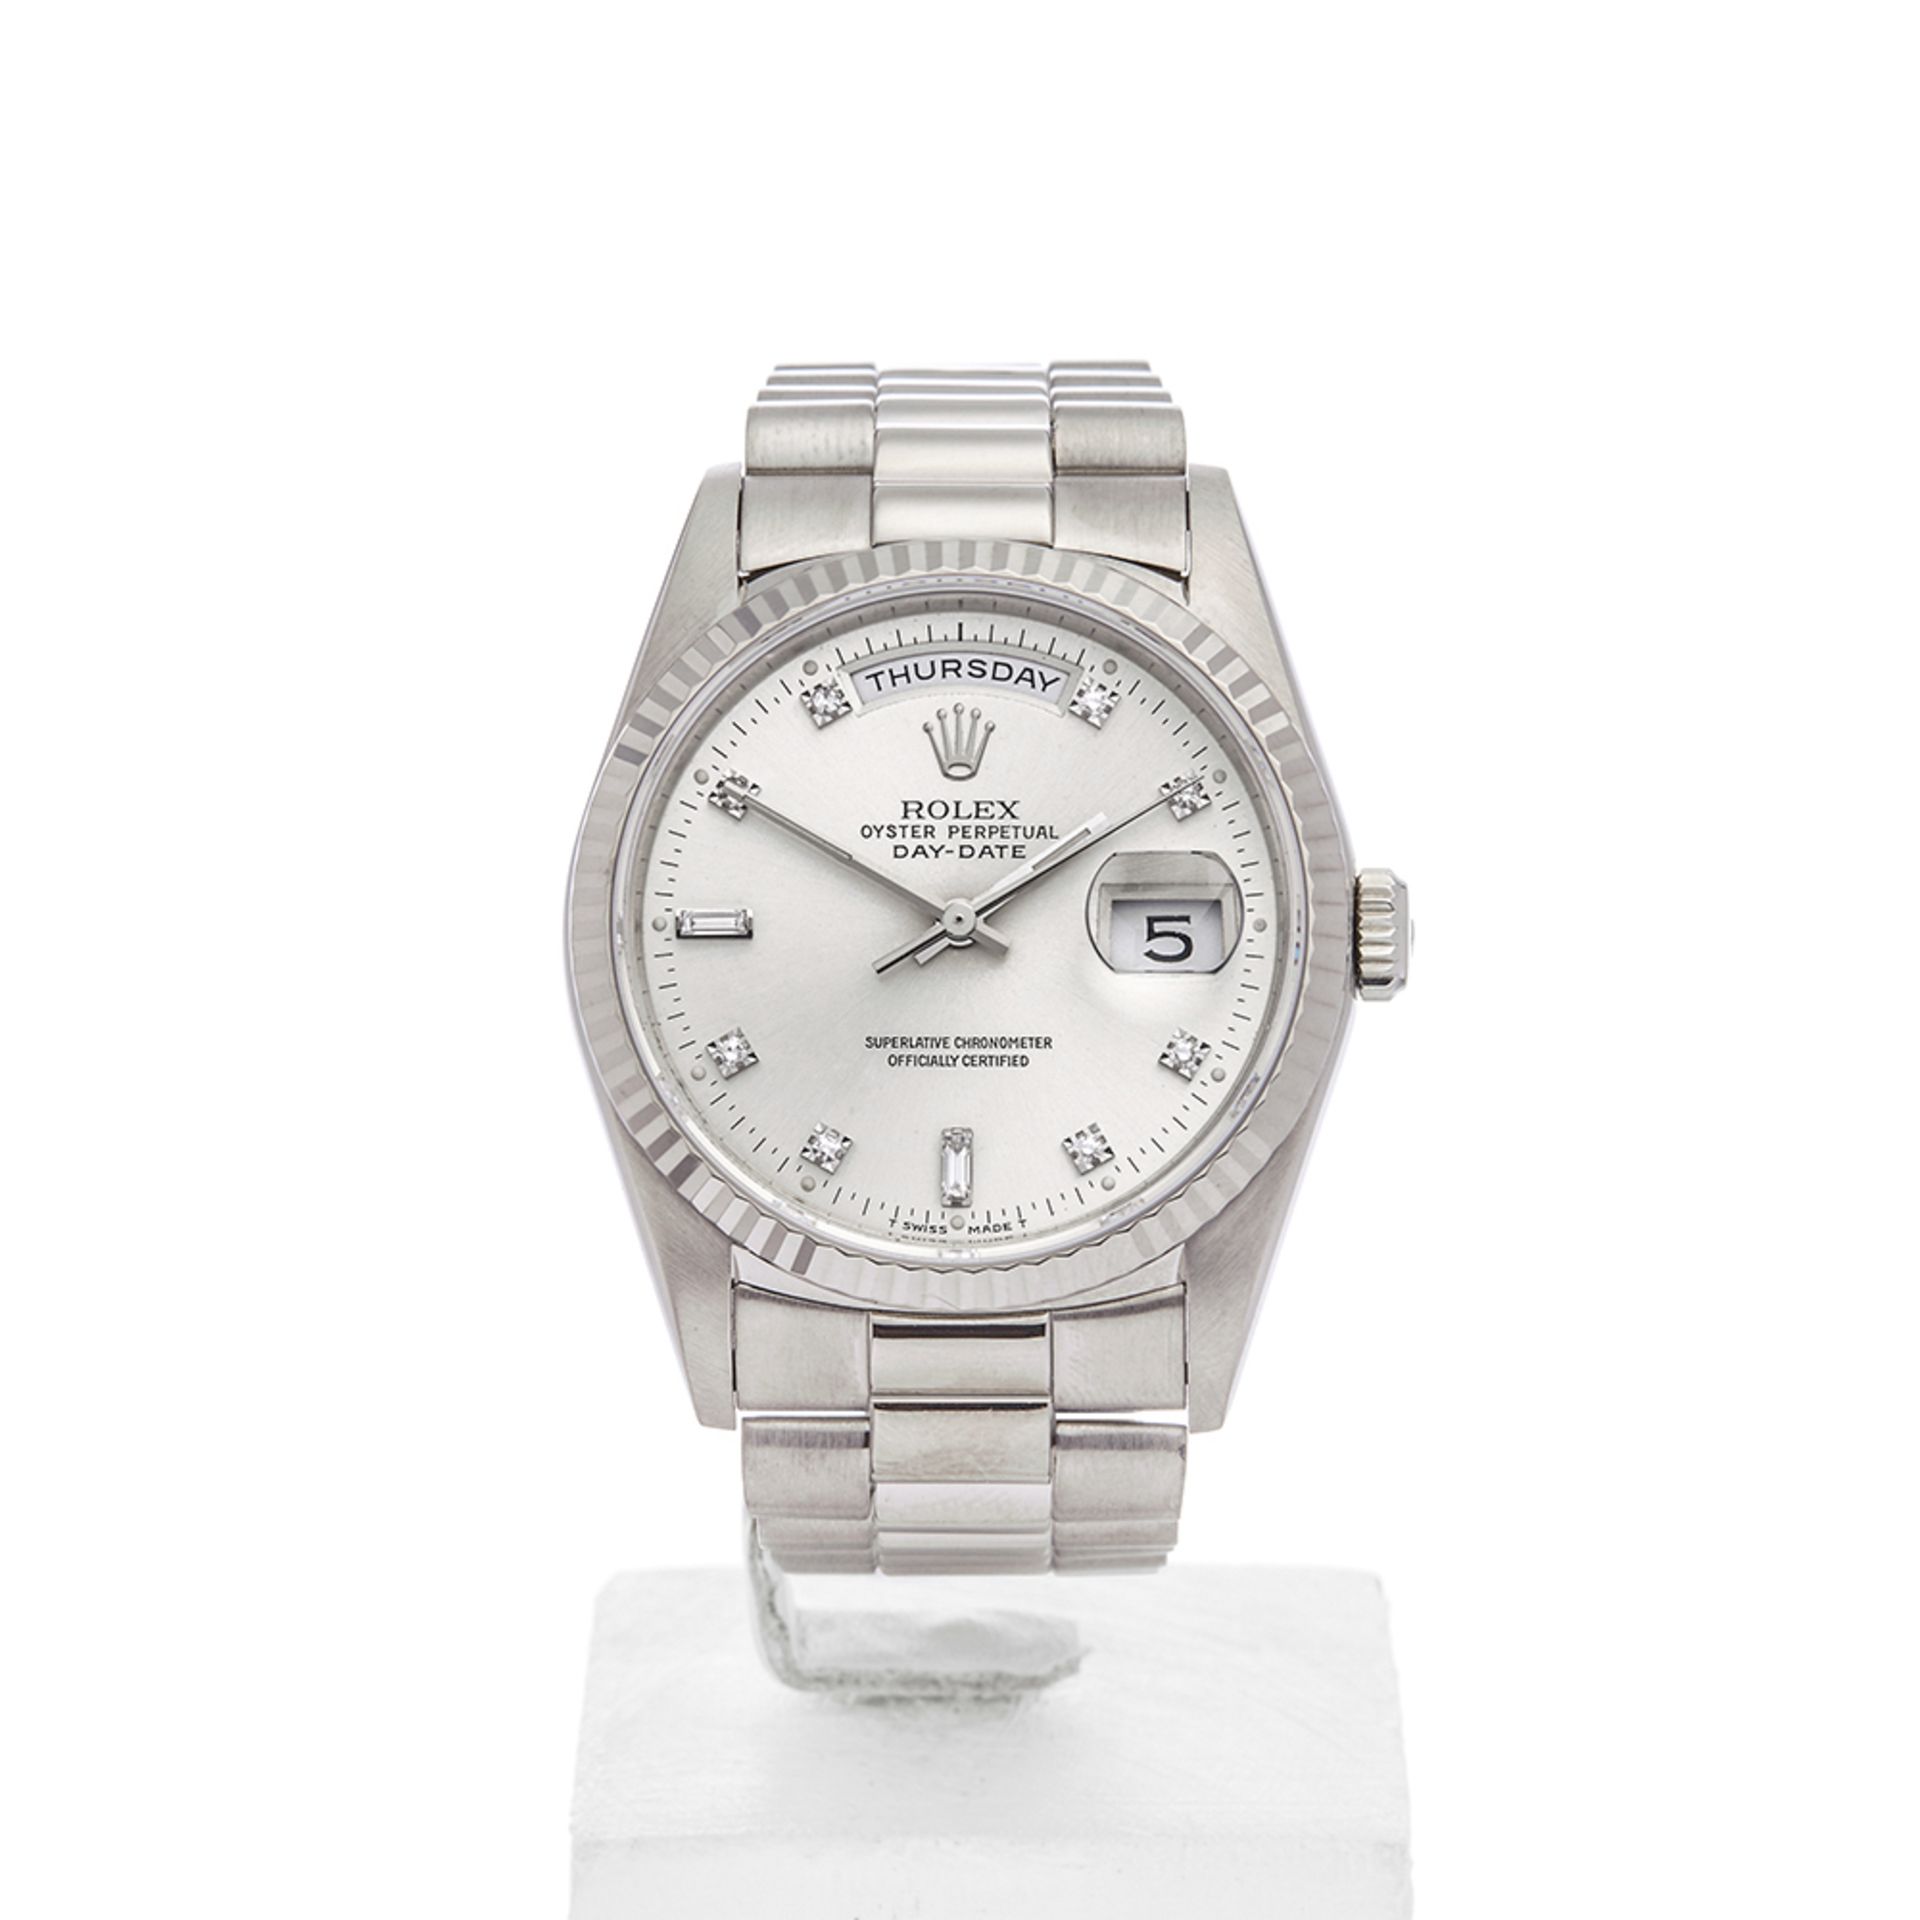 Rolex Day-Date 36mm 18k White Gold - 18239 - Image 2 of 7